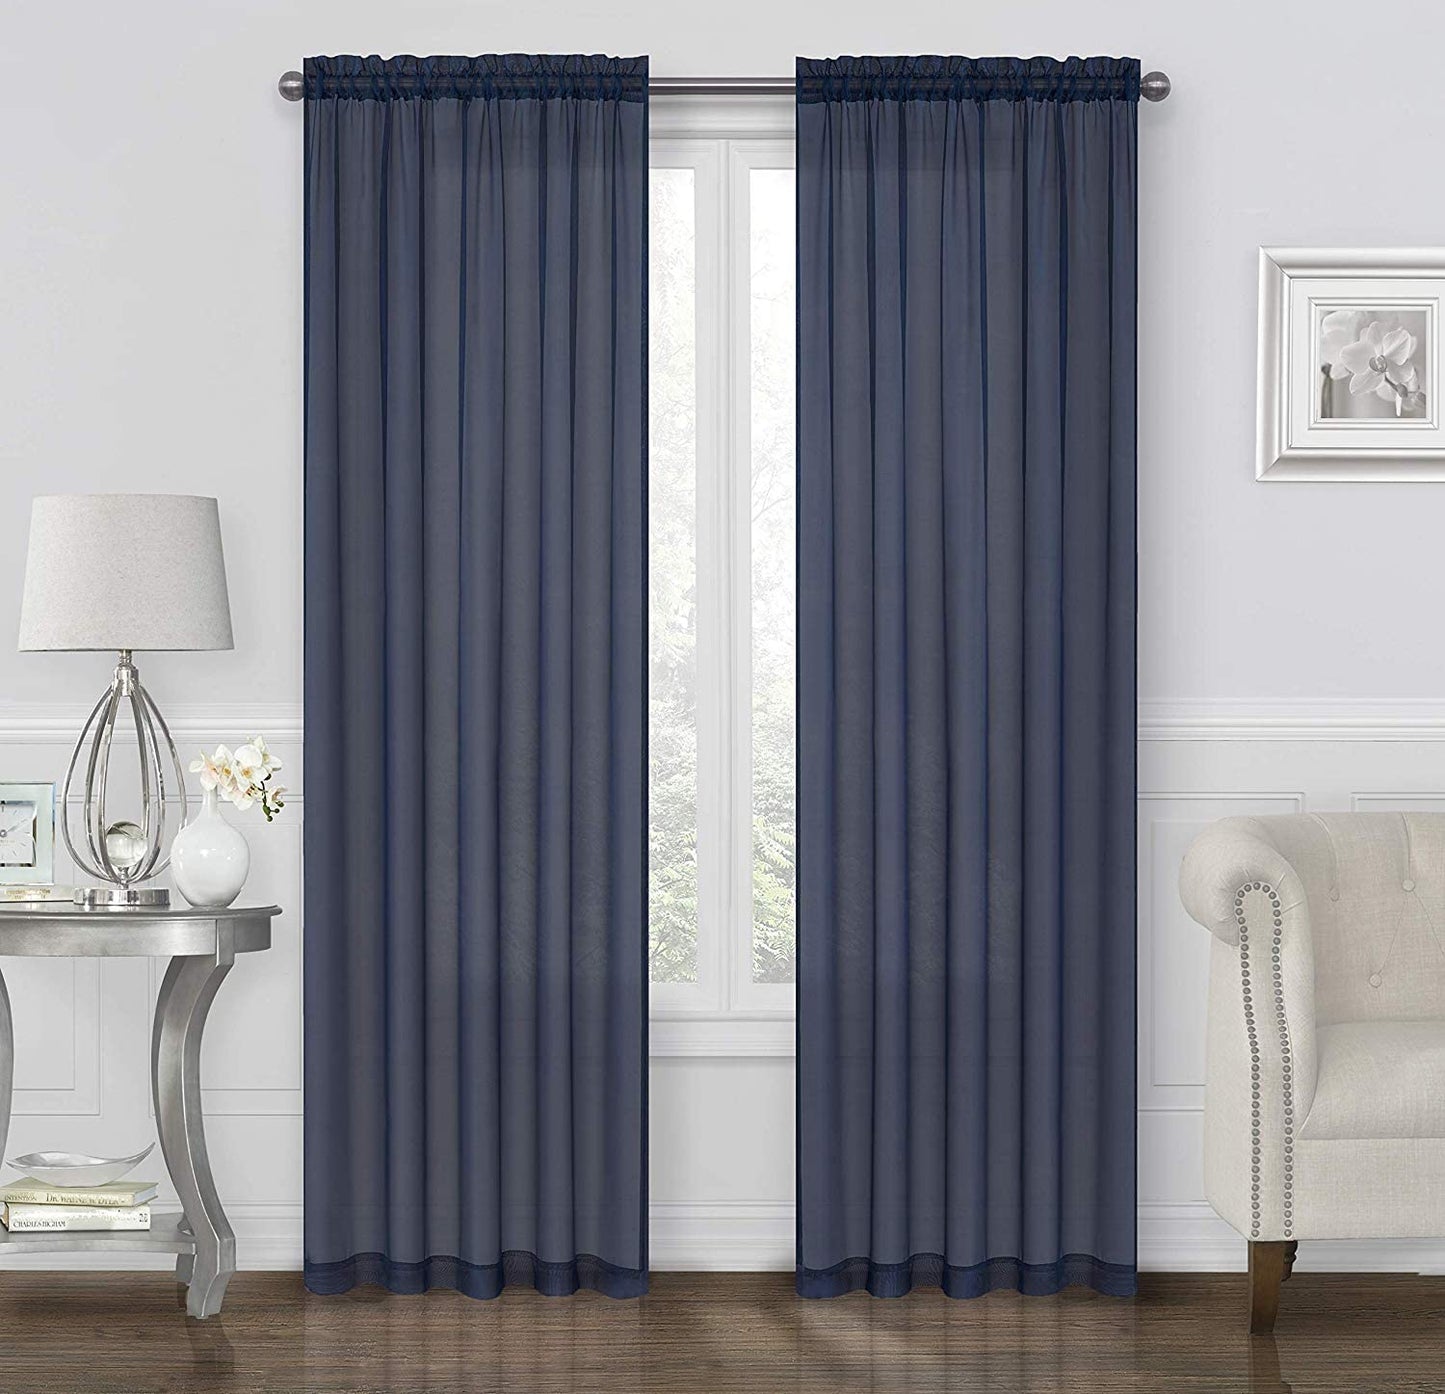 Goodgram 2 Pack: Basic Rod Pocket Sheer Voile Window Curtain Panels - Assorted Colors (White, 84 In. Long)  Goodgram Navy Contemporary 95 In. Long